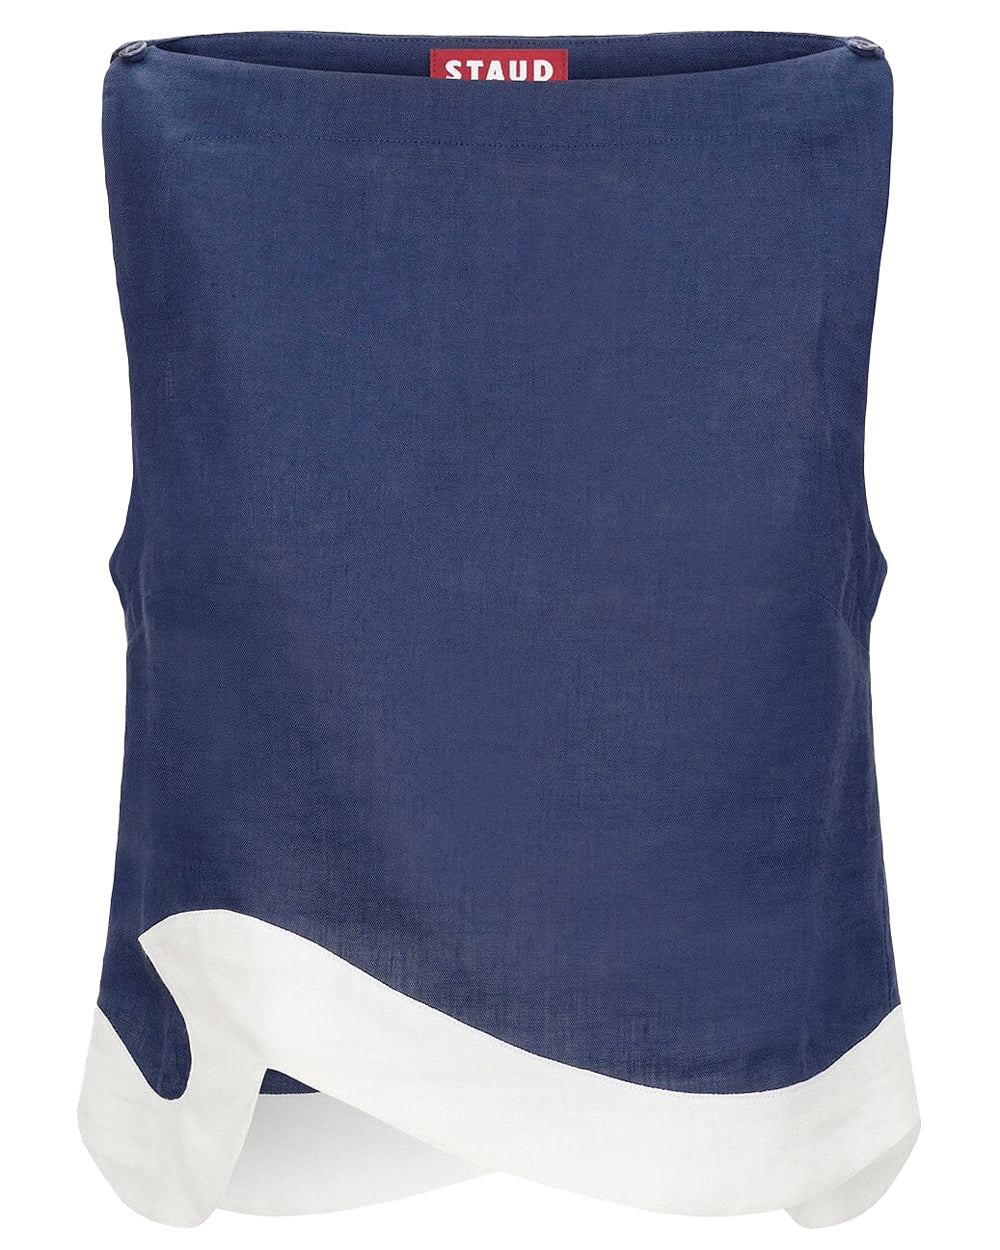 Navy and White Raphael Top